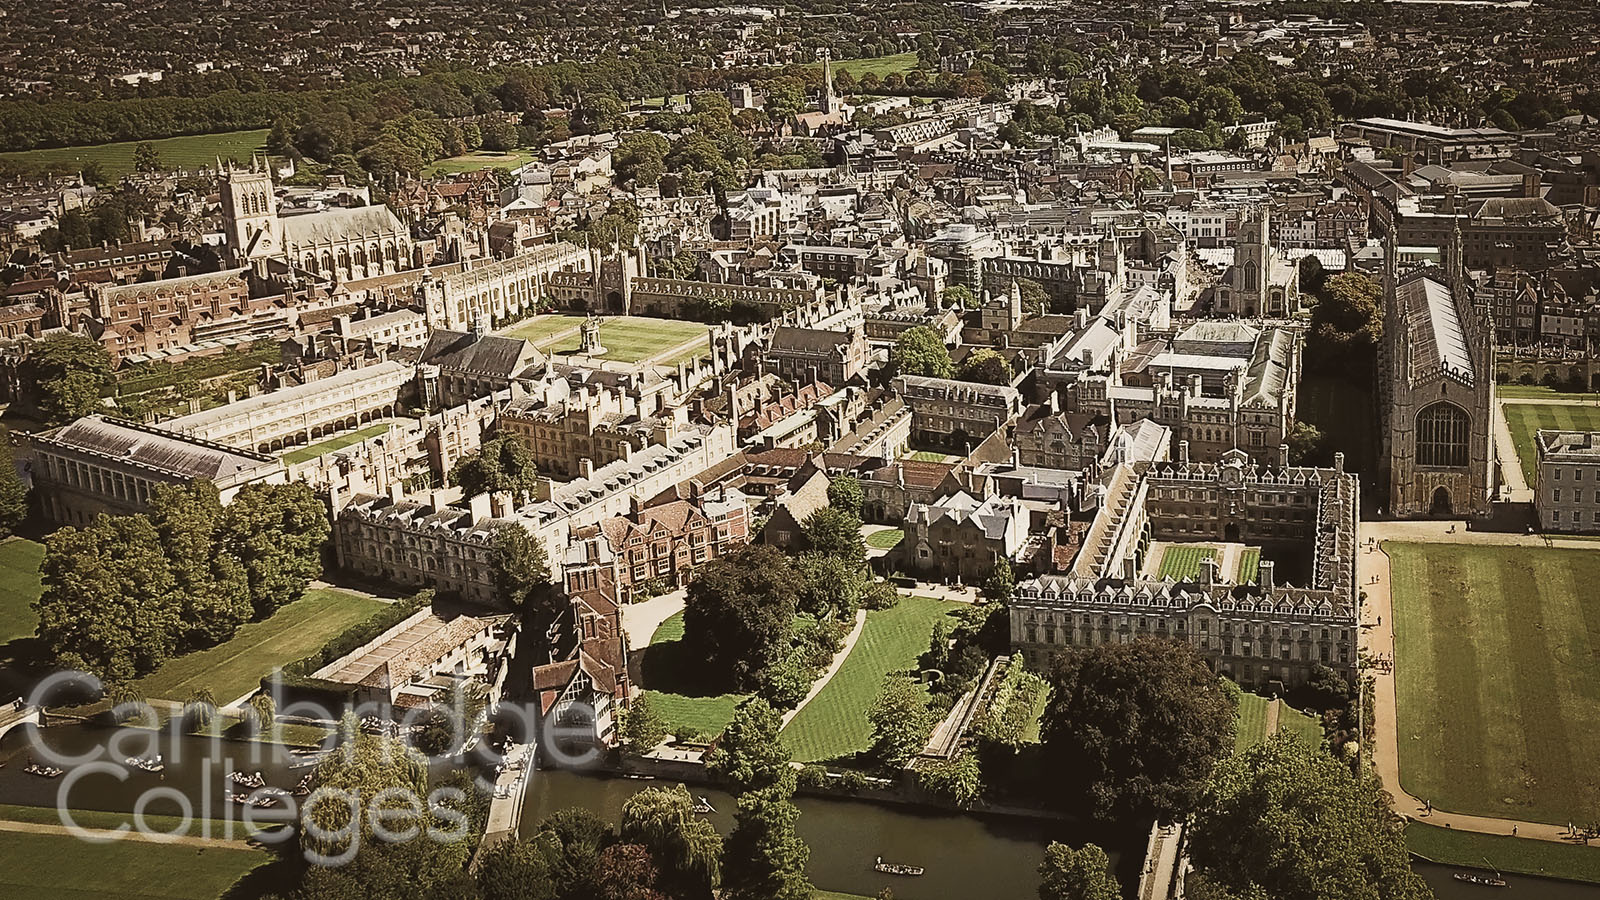 Aerial view of Cambridge city centre, showing a number of the colleges